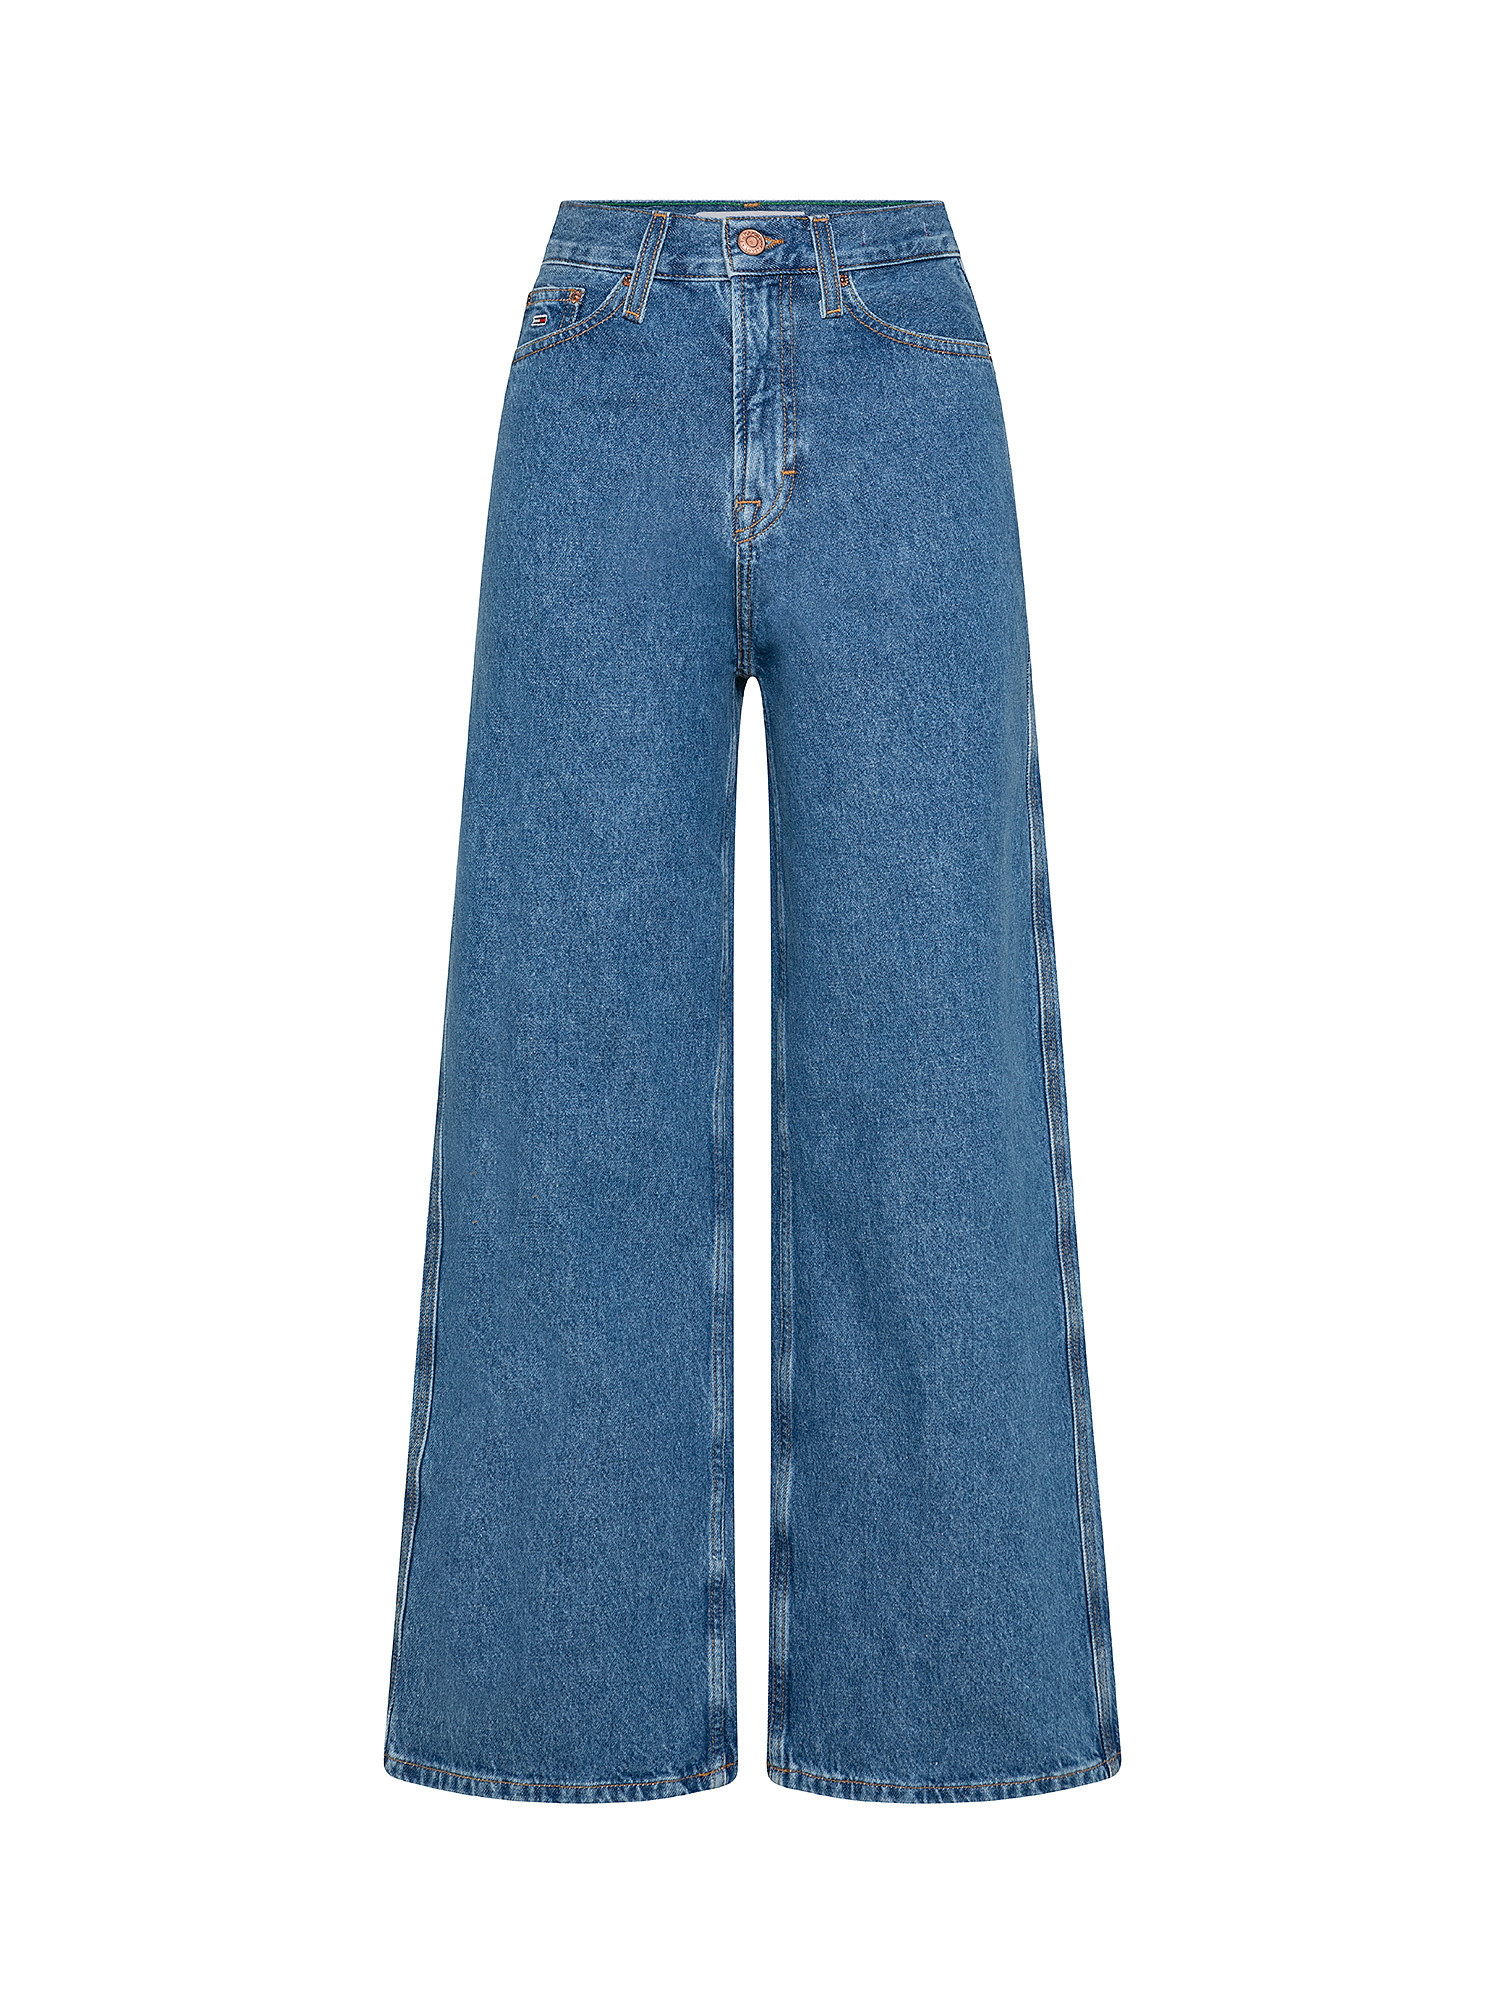 Claire high-waisted jeans, Denim, large image number 0